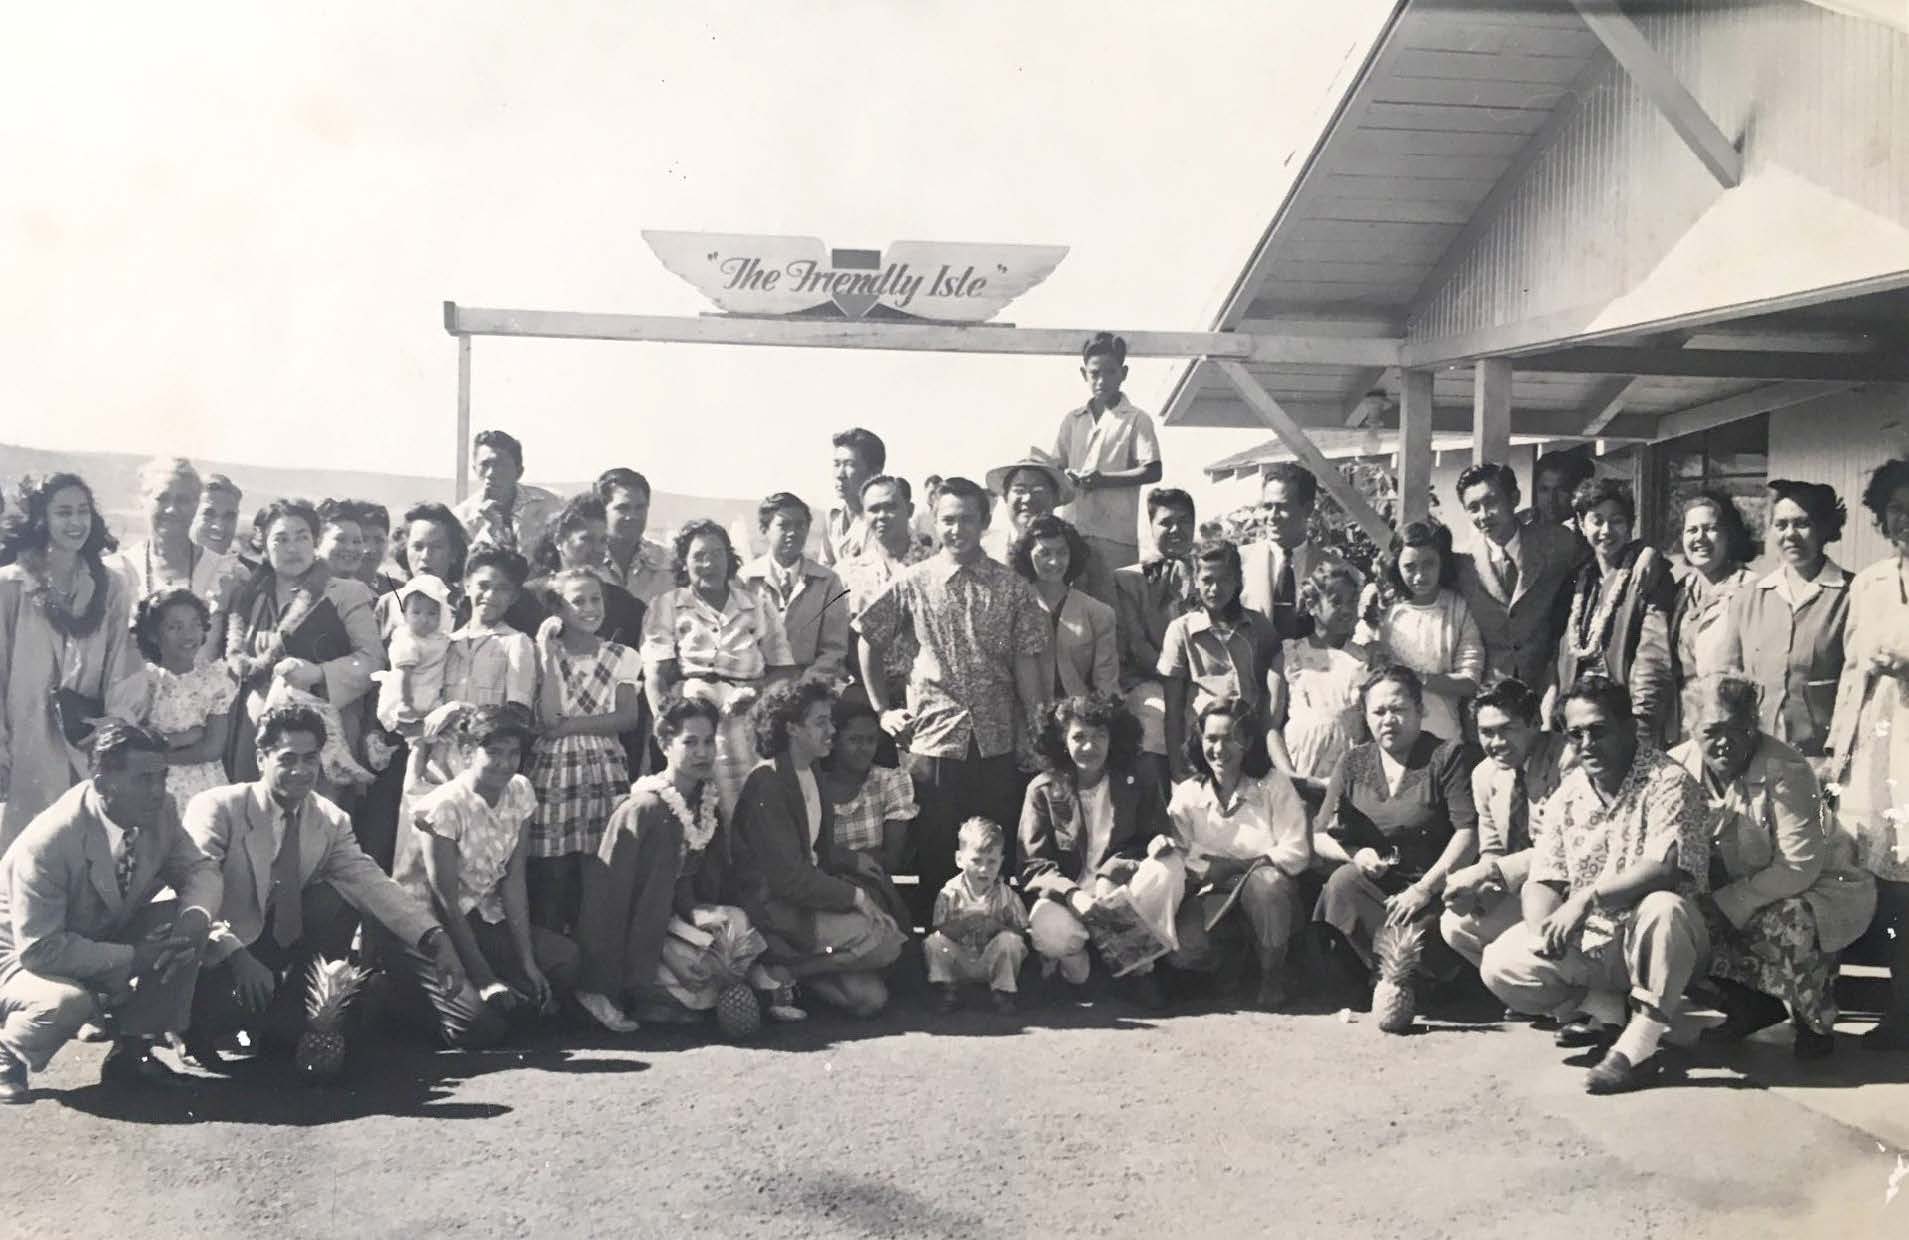 Moloka‘i Saints at the airport in the 1940s. Despite many obstacles during World War II, these Saints continued their tradition of an annual temple trip, inspiring others to do the same. Courtesy of Church History Library.